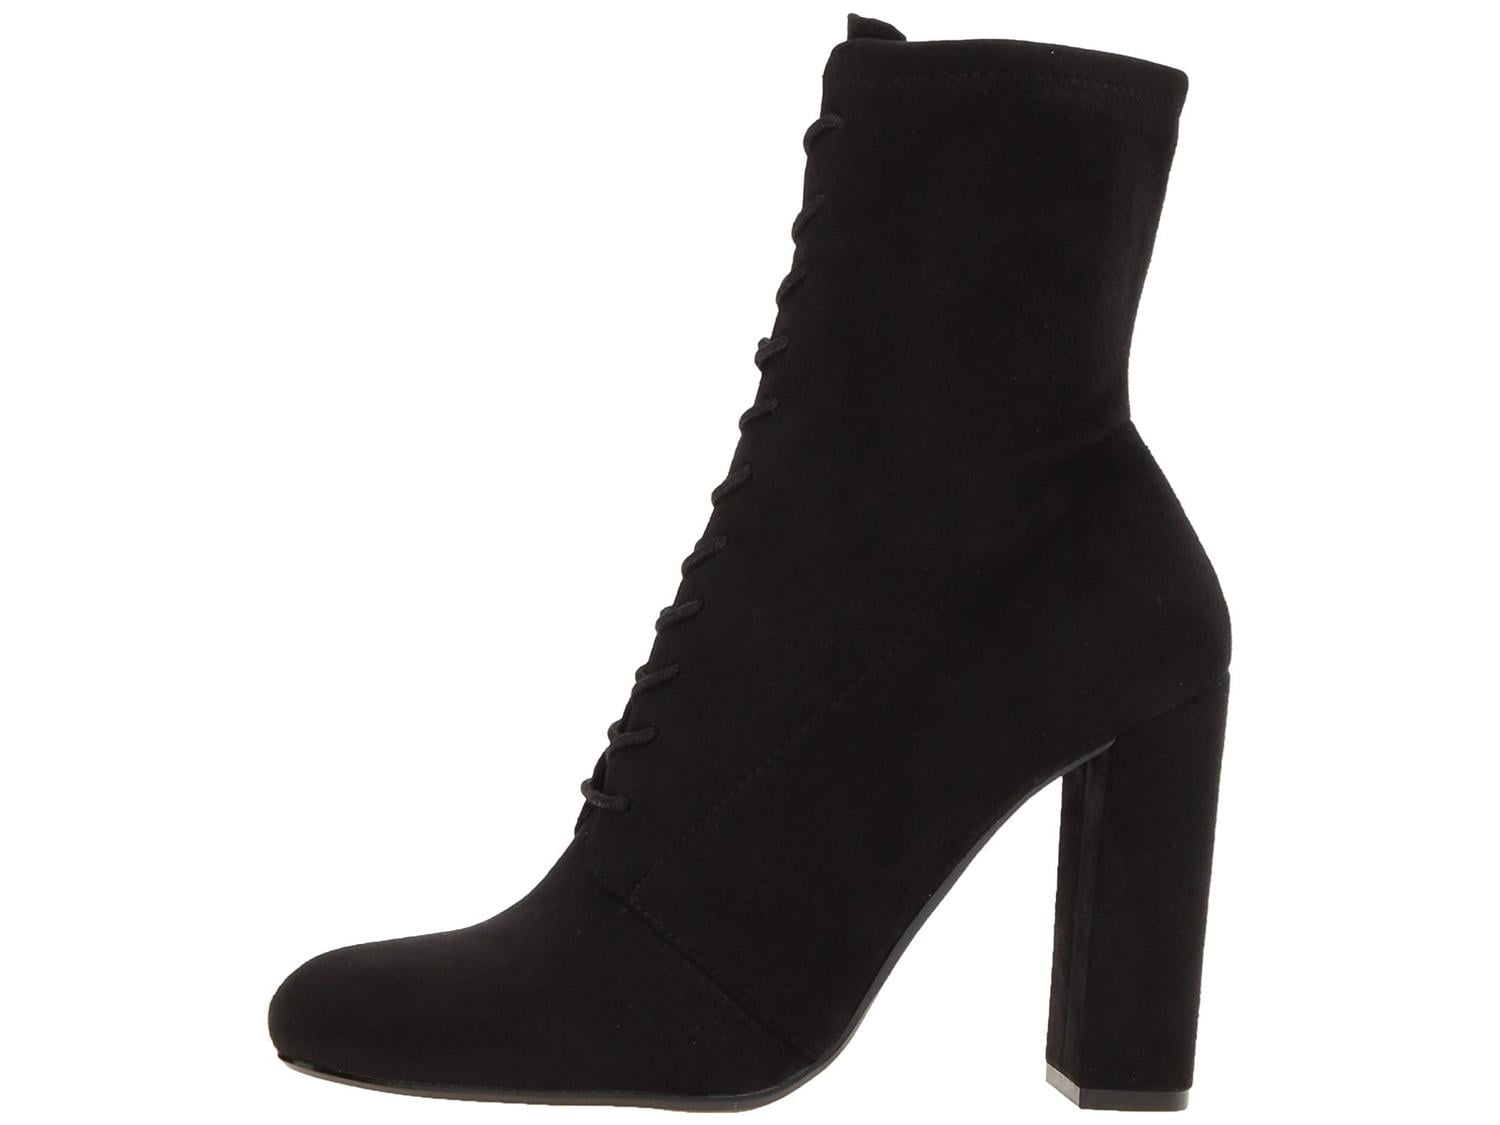 steve madden elley lace up bootie